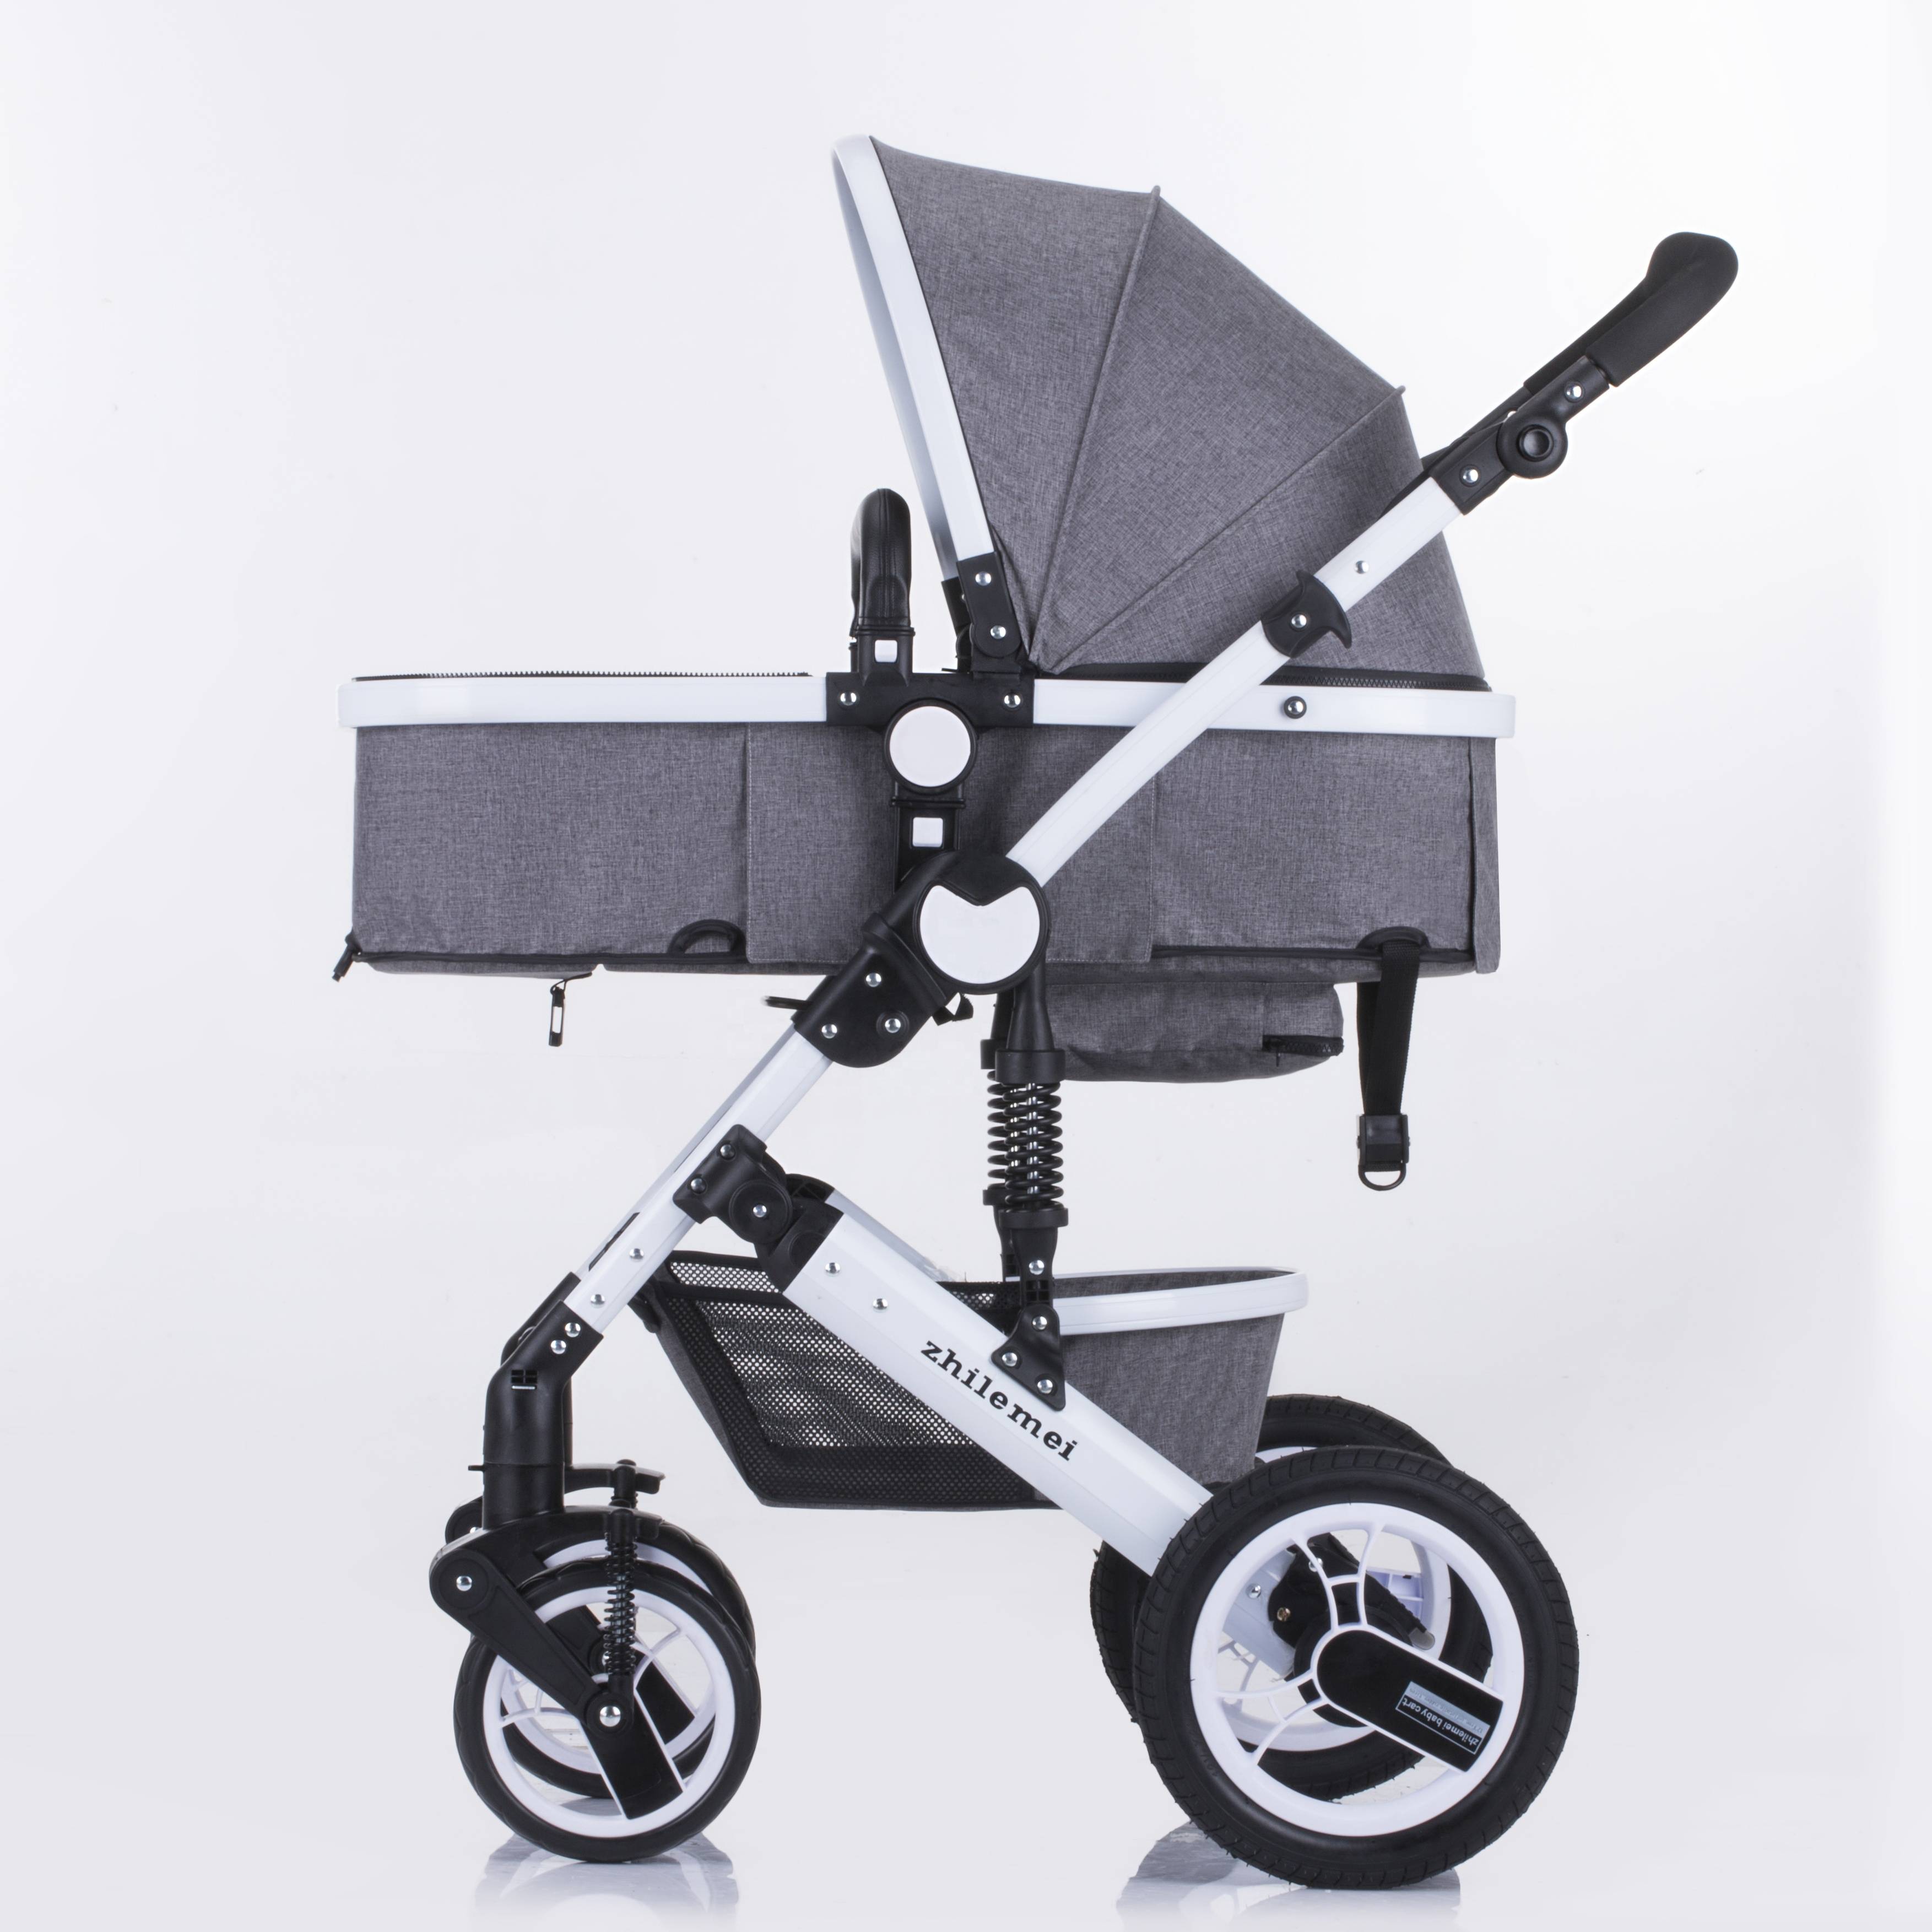 EVA adjustable handle stroller bike for baby and mother / stroller baby pram tricycle / four Removable wheel stroller with cover